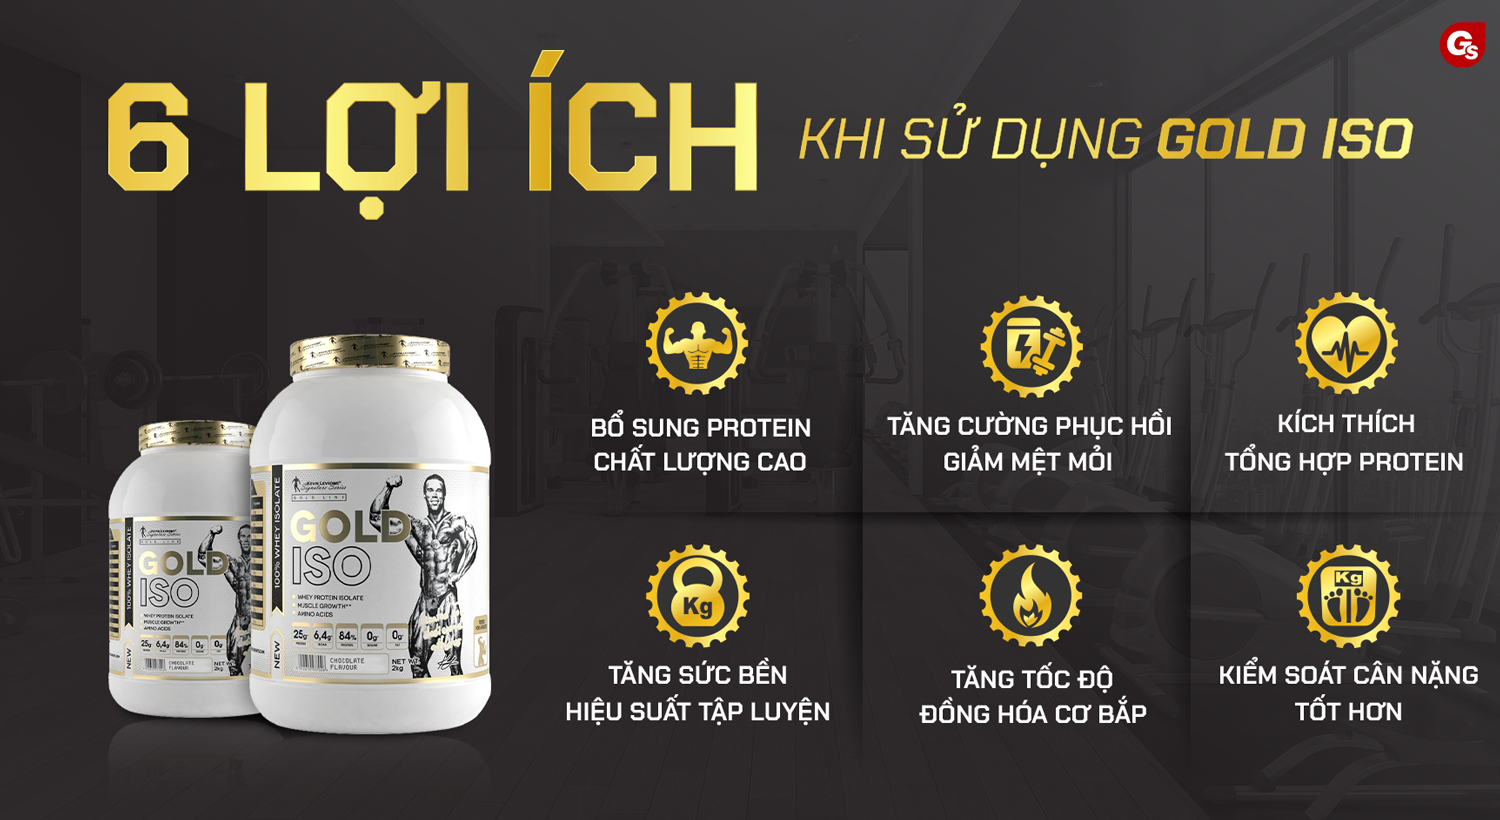 kevin-levrone-gold-iso-xay-dung-co-bap-gymstore-2